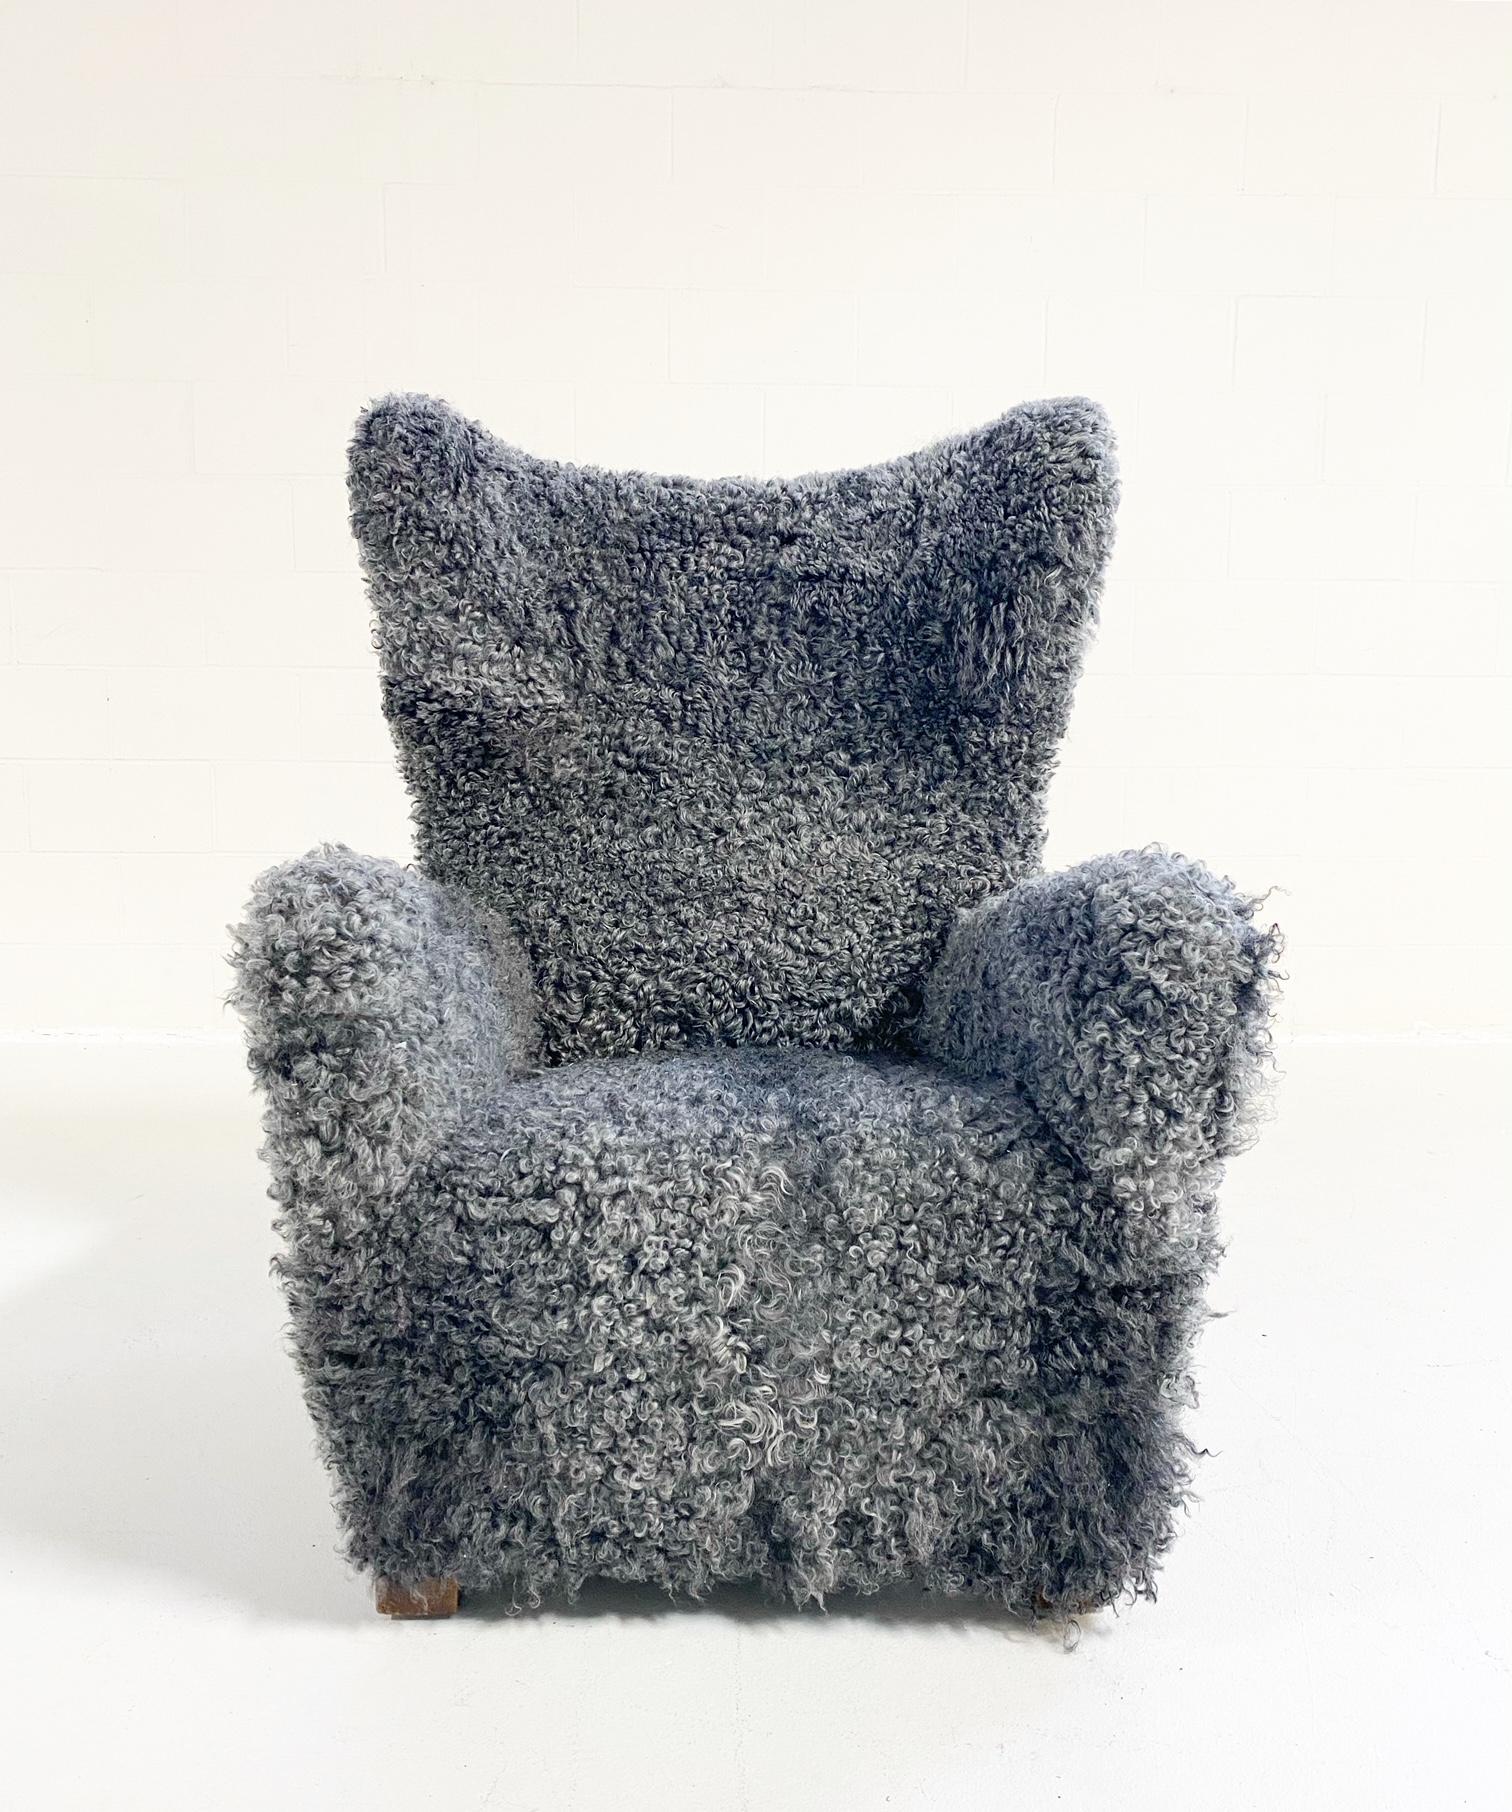 Description
We love a vintage Fritz Hansen wingback. All oversized and deep for ultra-comfortable lounging. This model 1672 chair, made in Denmark during the 1940s, was overhauled and completely restored in beautifully cozy Gotland sheepskin. Now,